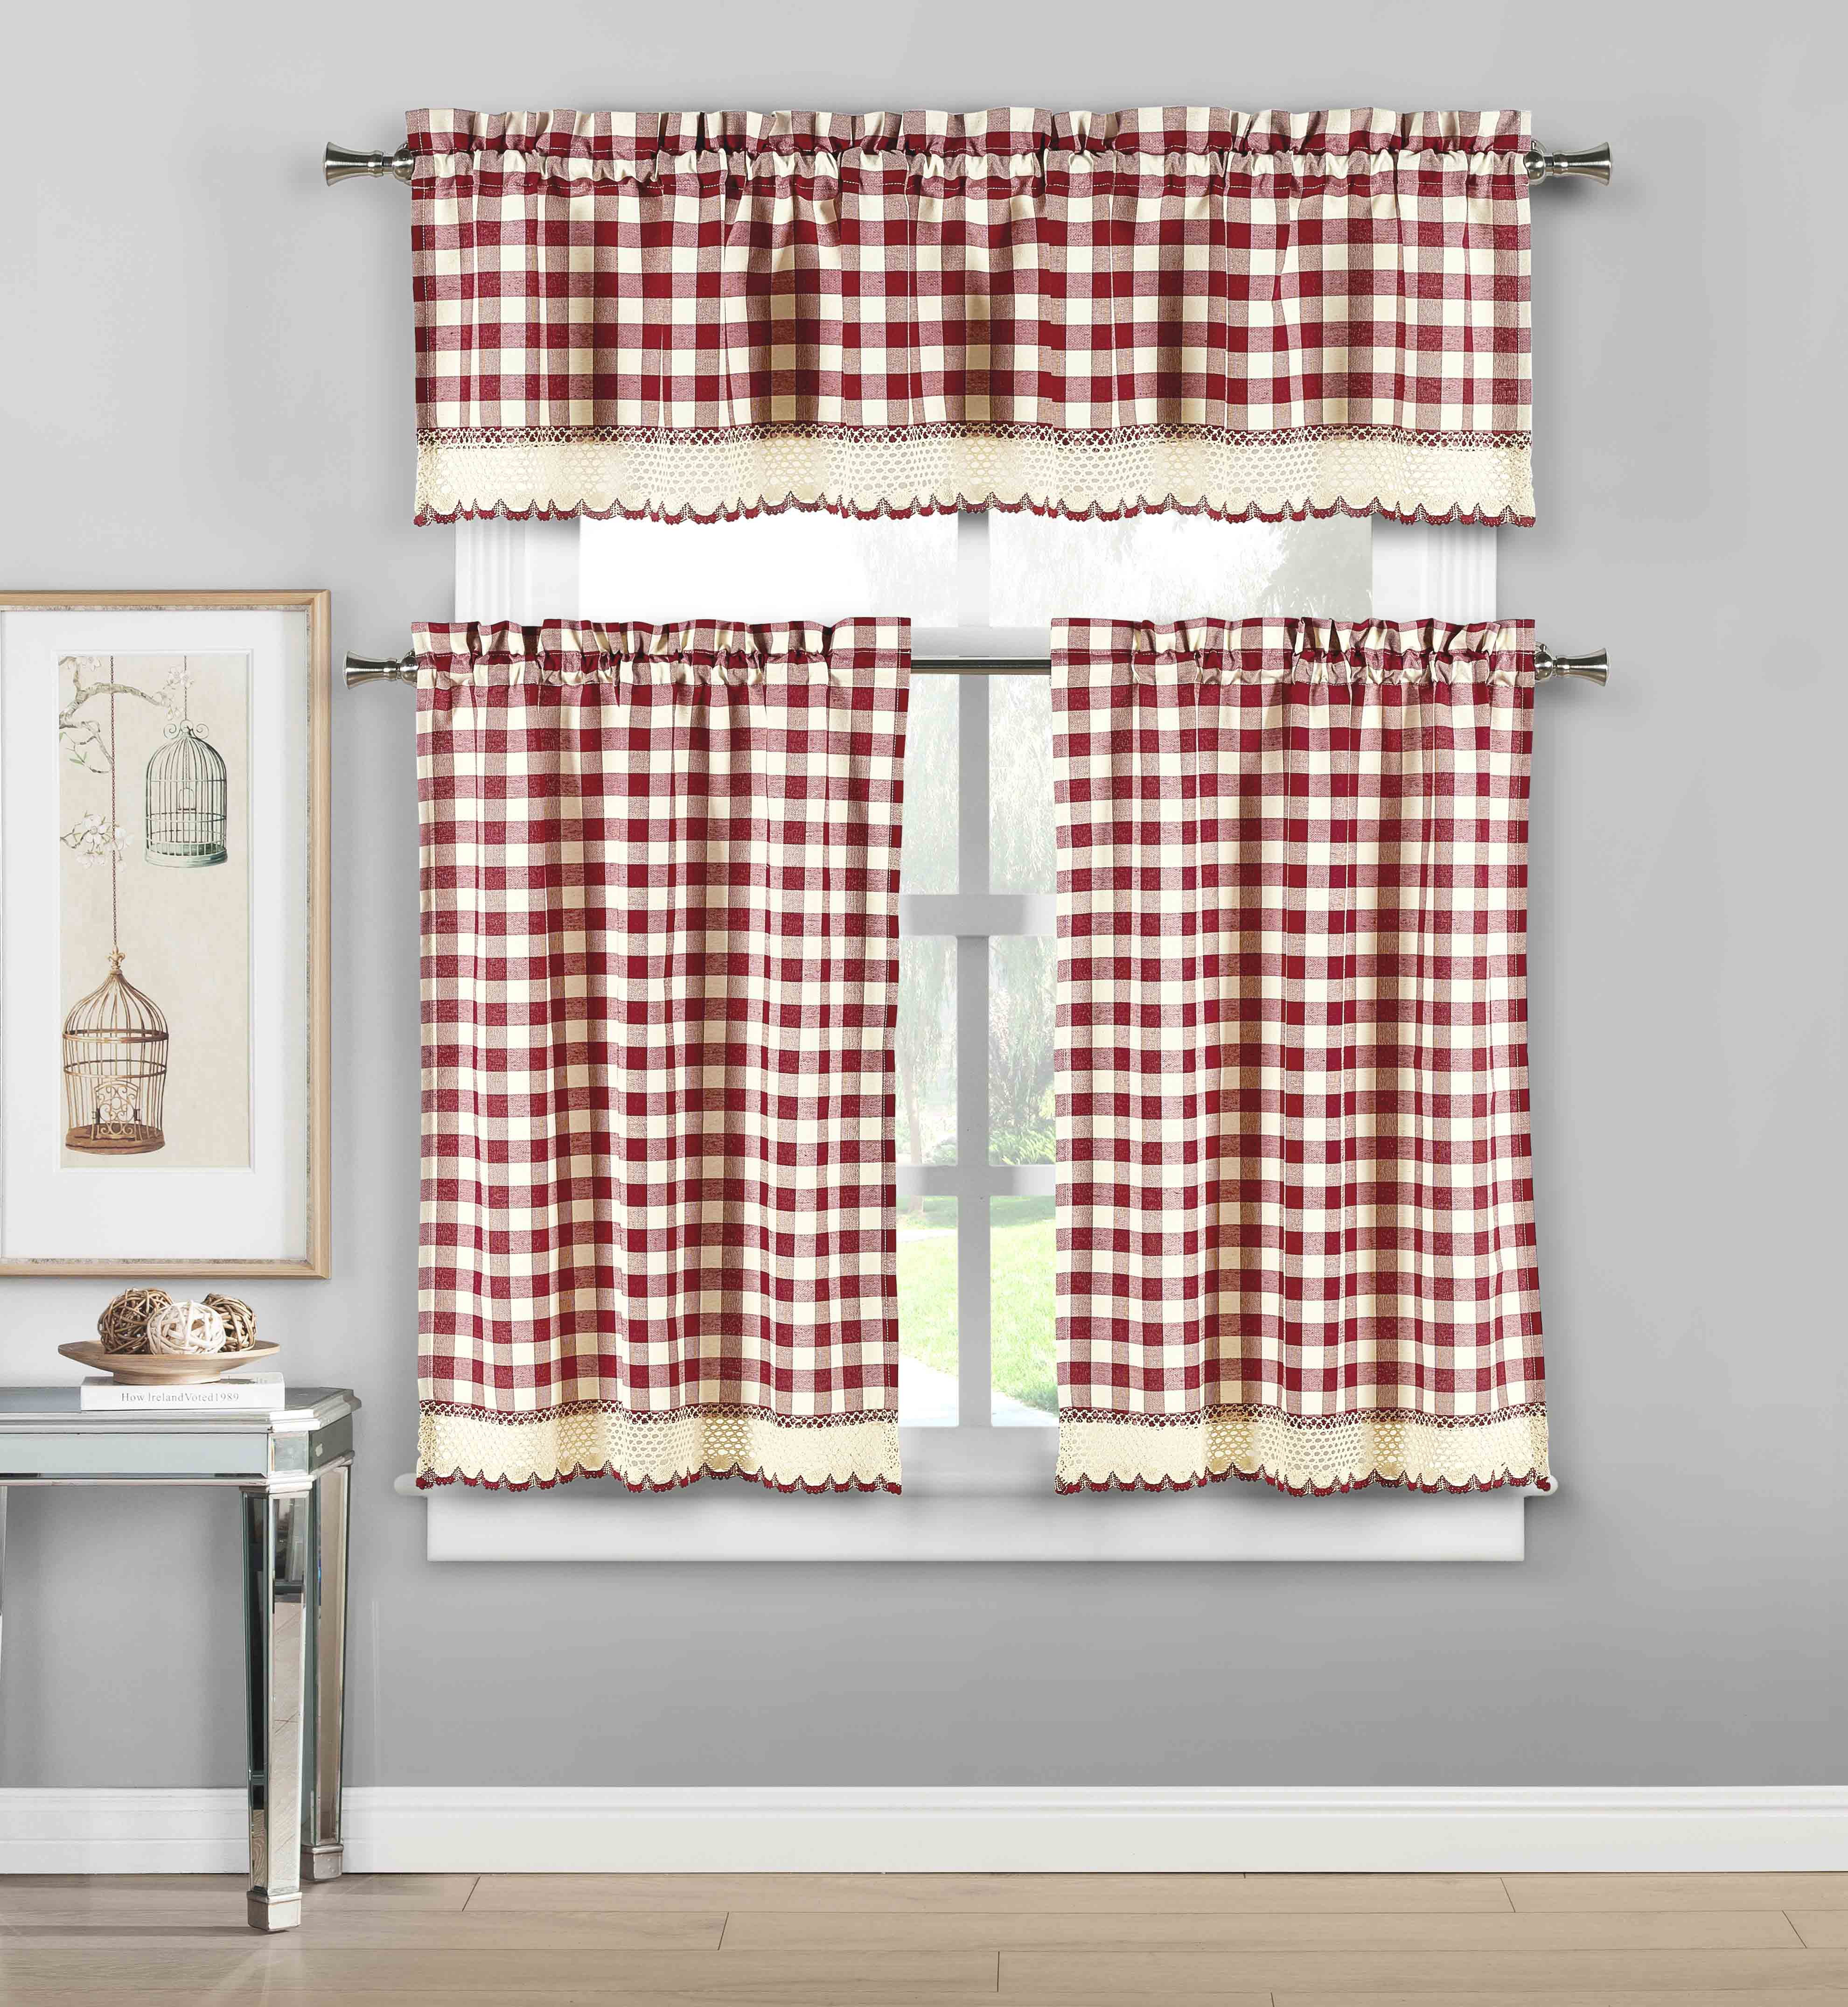 53" Wide 16" Long Homemade Lined High Quality Valance Farmhouse Red & Plaid 43" 